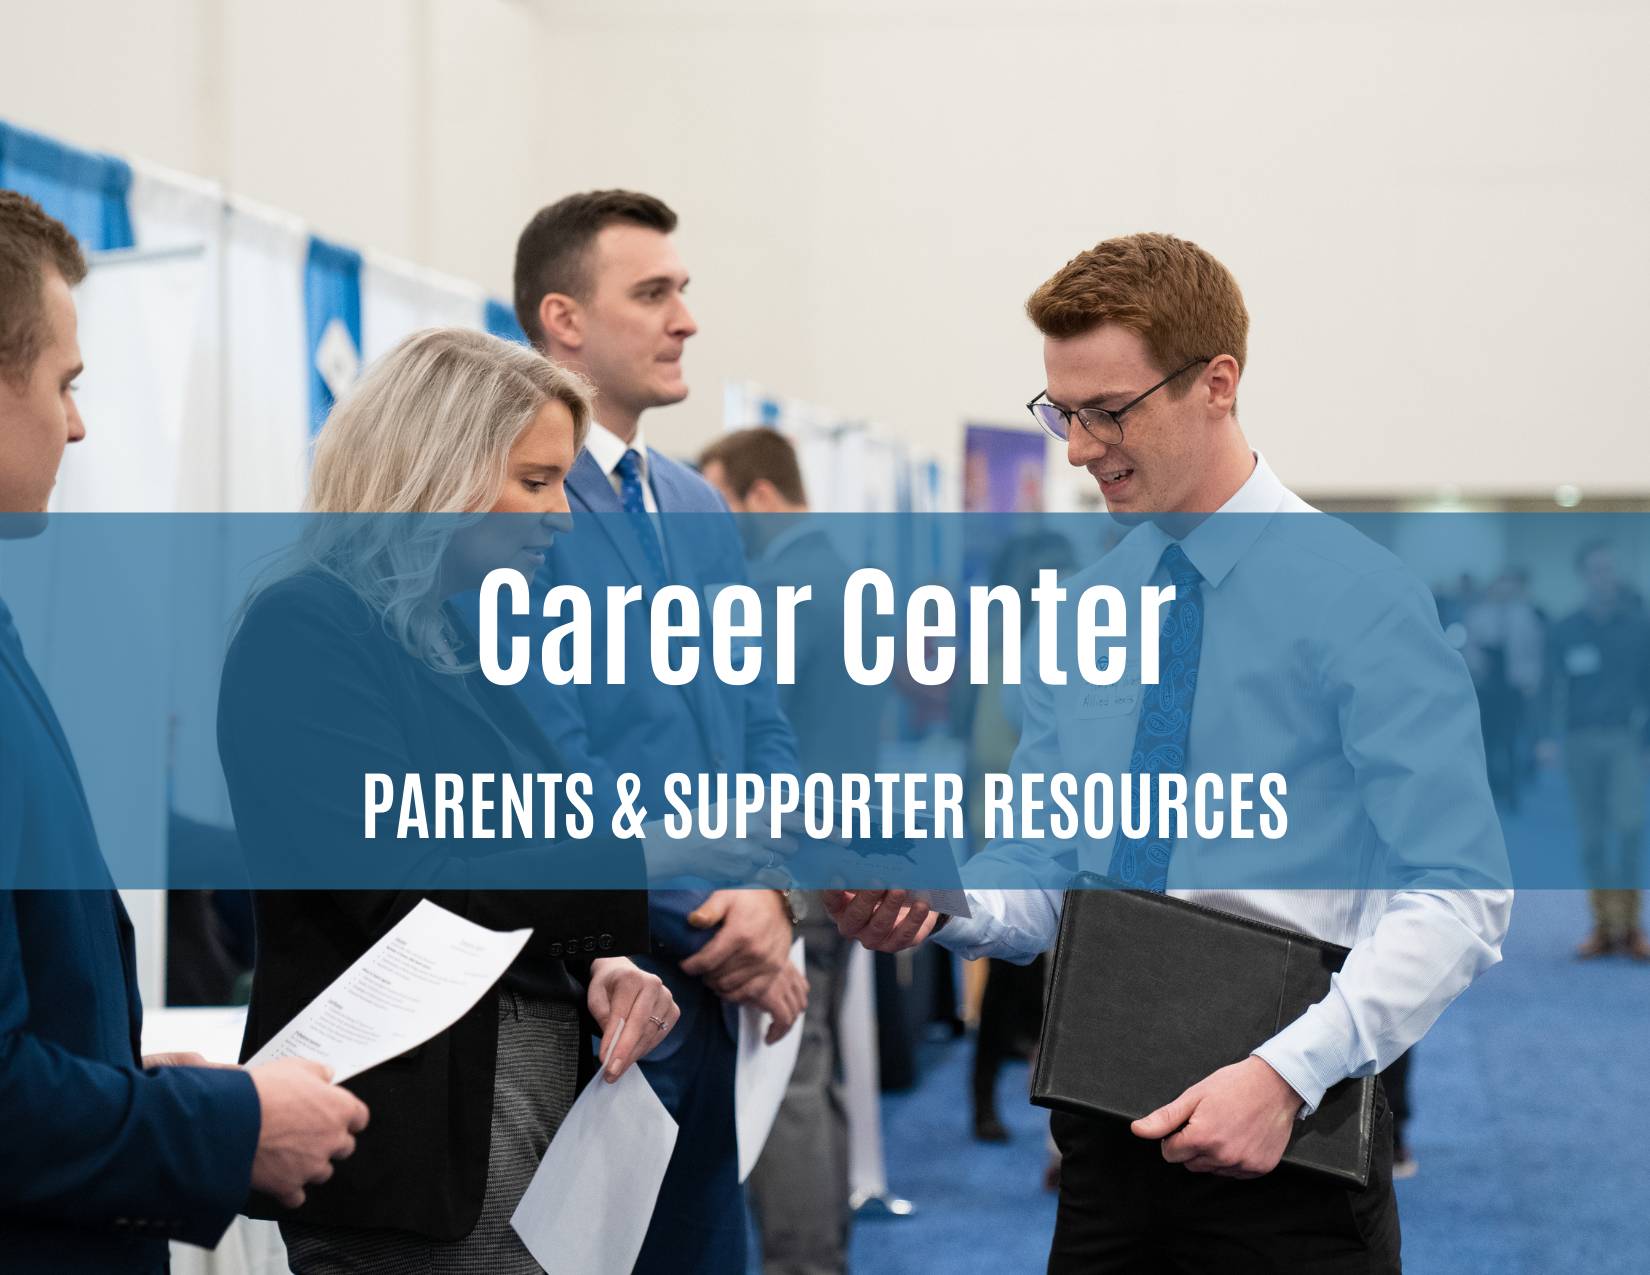 Career center; parents and supporter resources